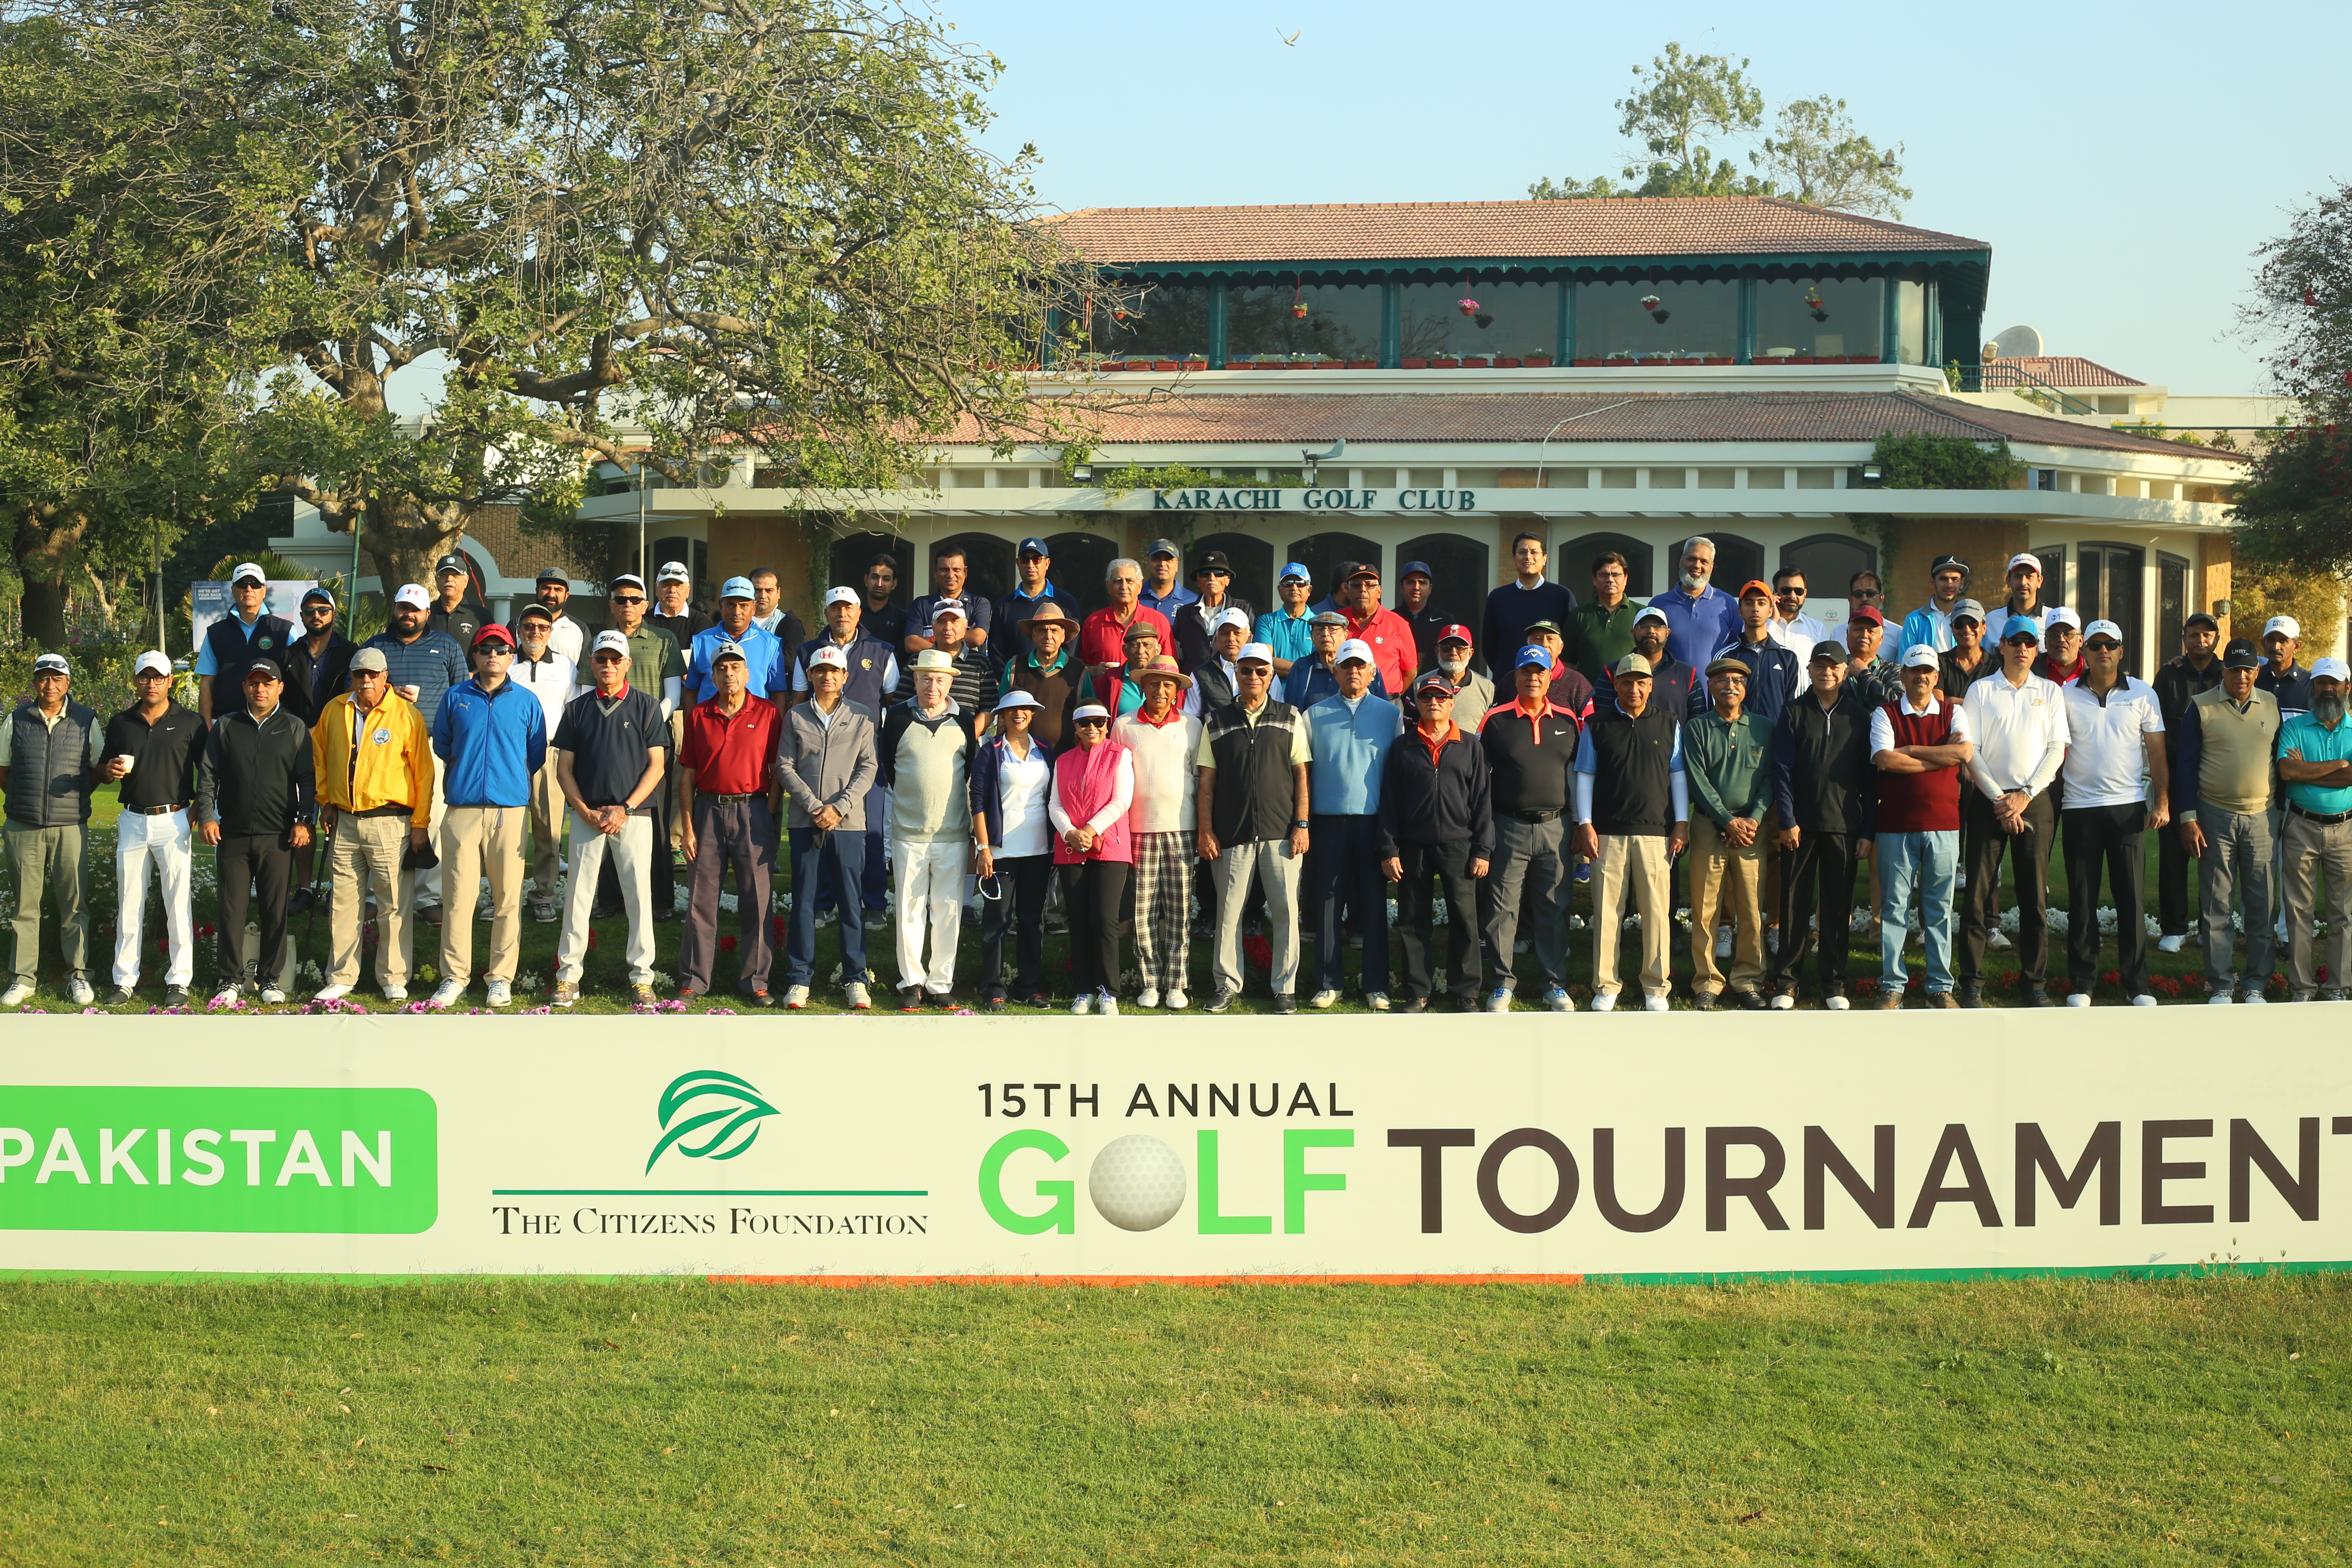 28 team of golfers at 15th TCF Golf tournament before tee off